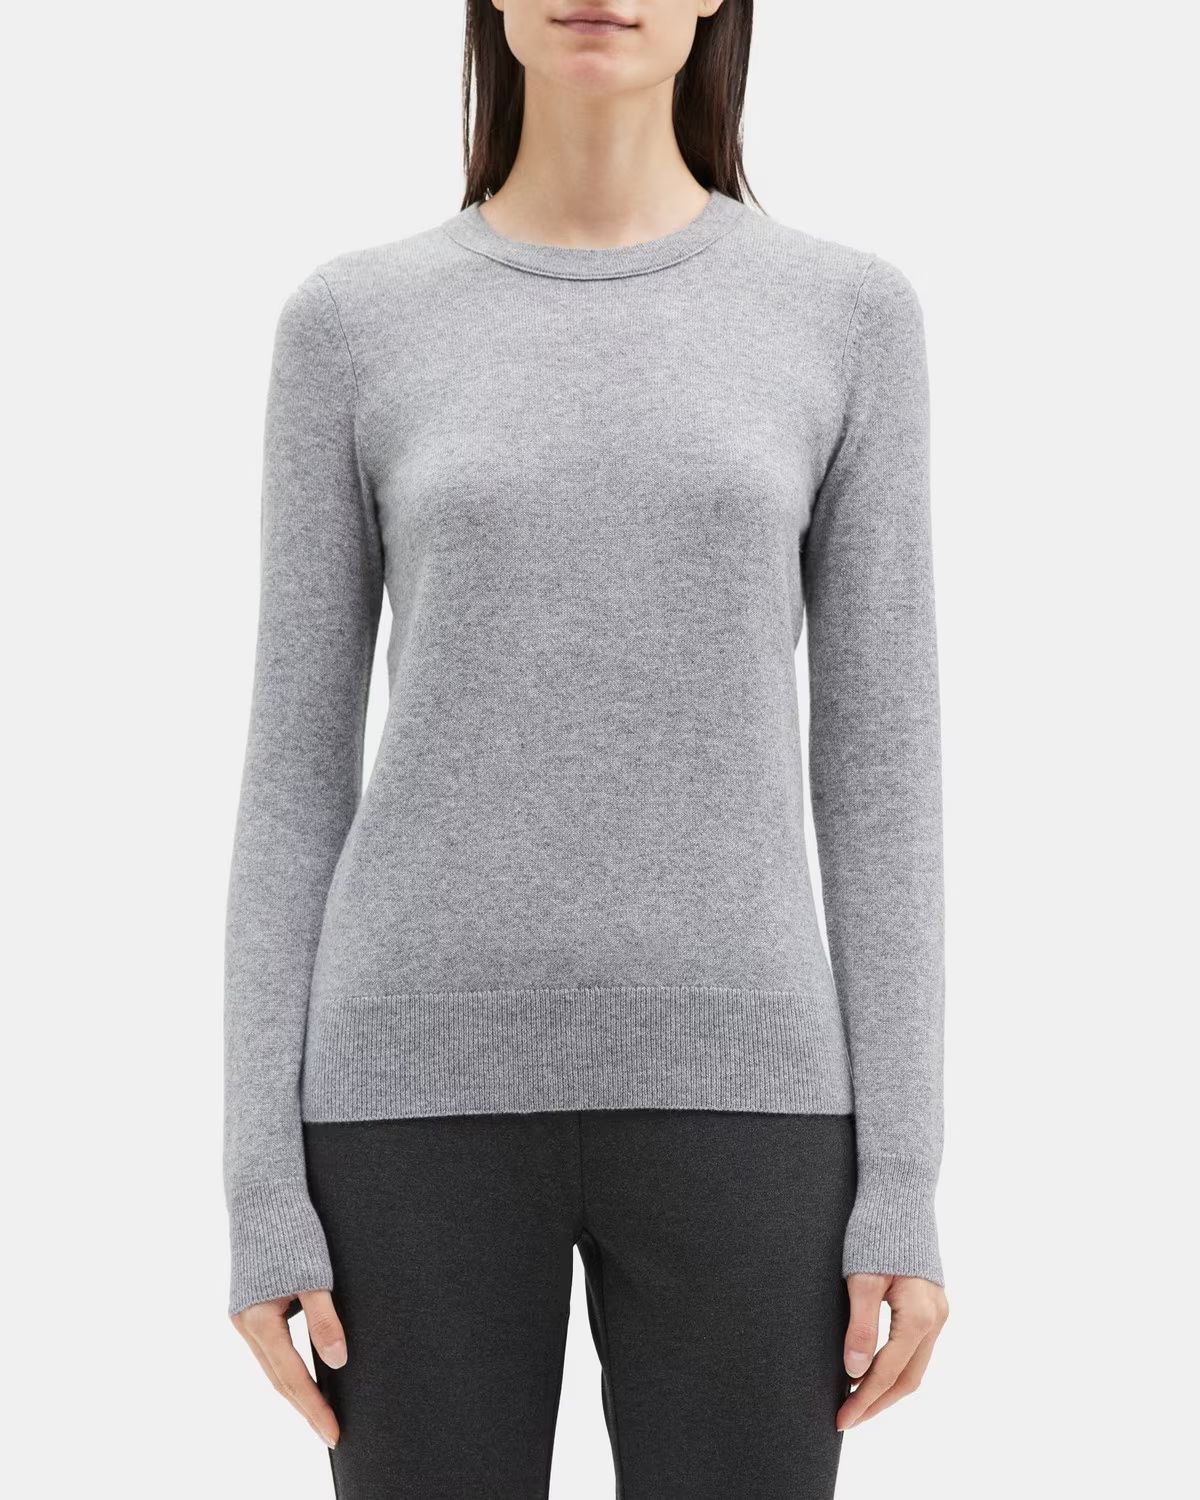 Crewneck Sweater in Cashmere | Theory Outlet